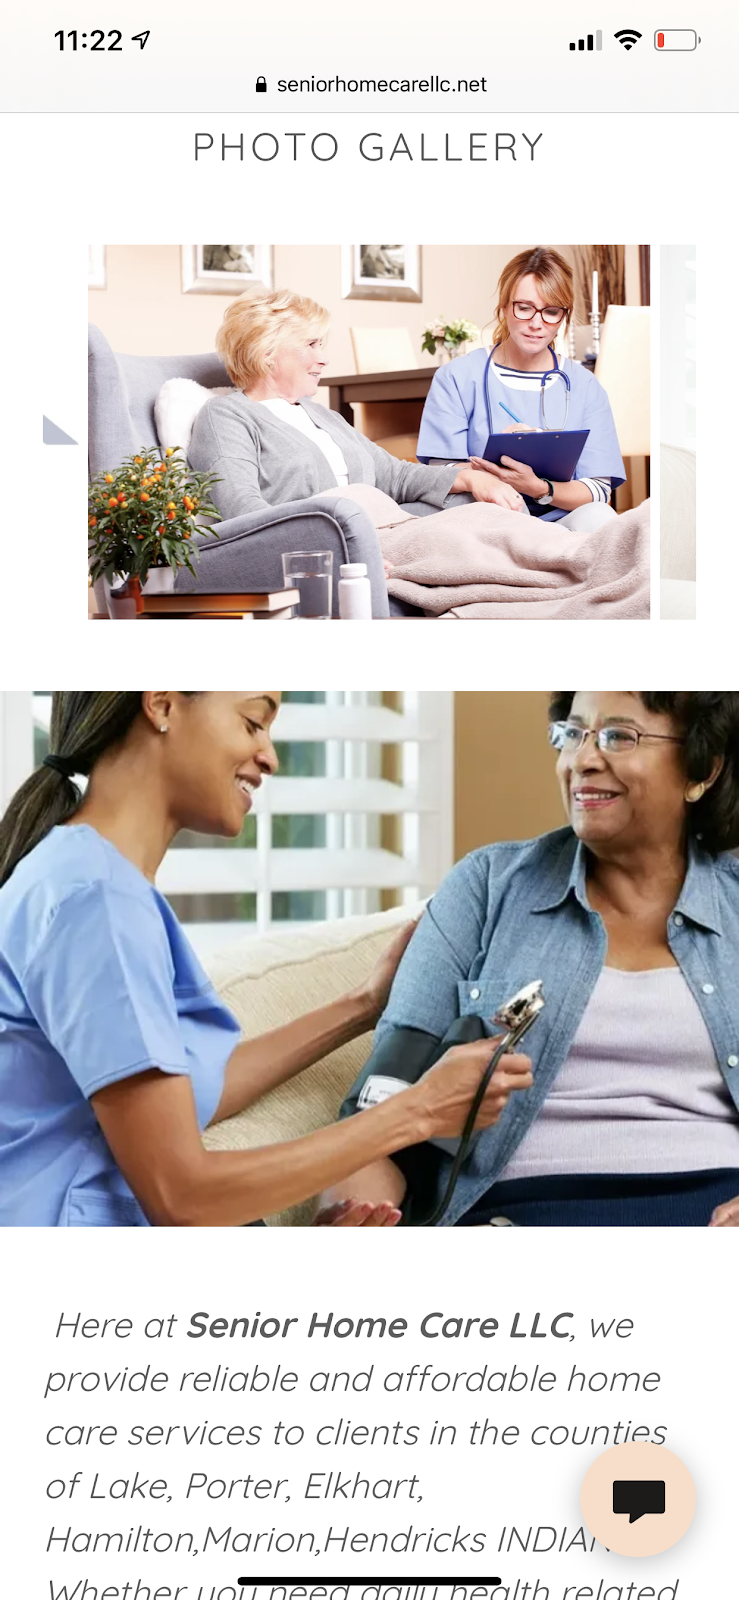 Senior home care LLC personal servica agency | 7863 Broadway Suite 242, Merrillville, IN 46410 | Phone: (219) 525-5201